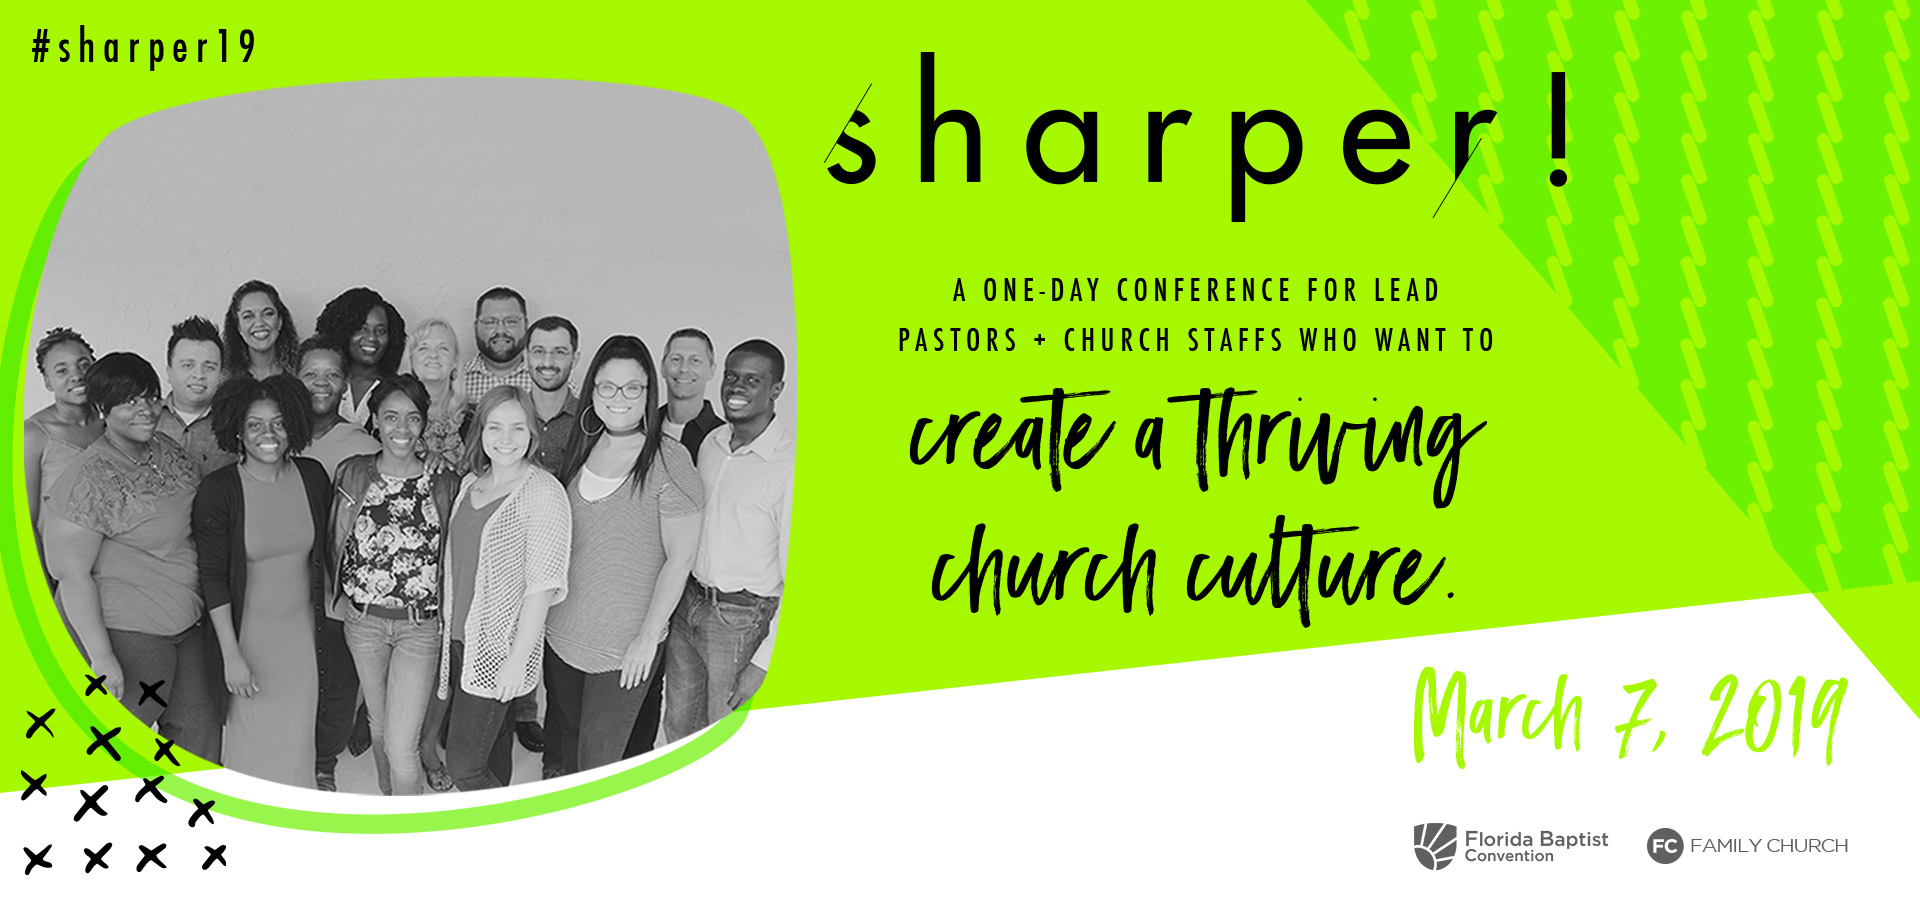 A one day conference for lead pastors and church staff who are looking to multiply disciples and churches. It will be held in West Palm Beach, Florida on March 7th, 2019.